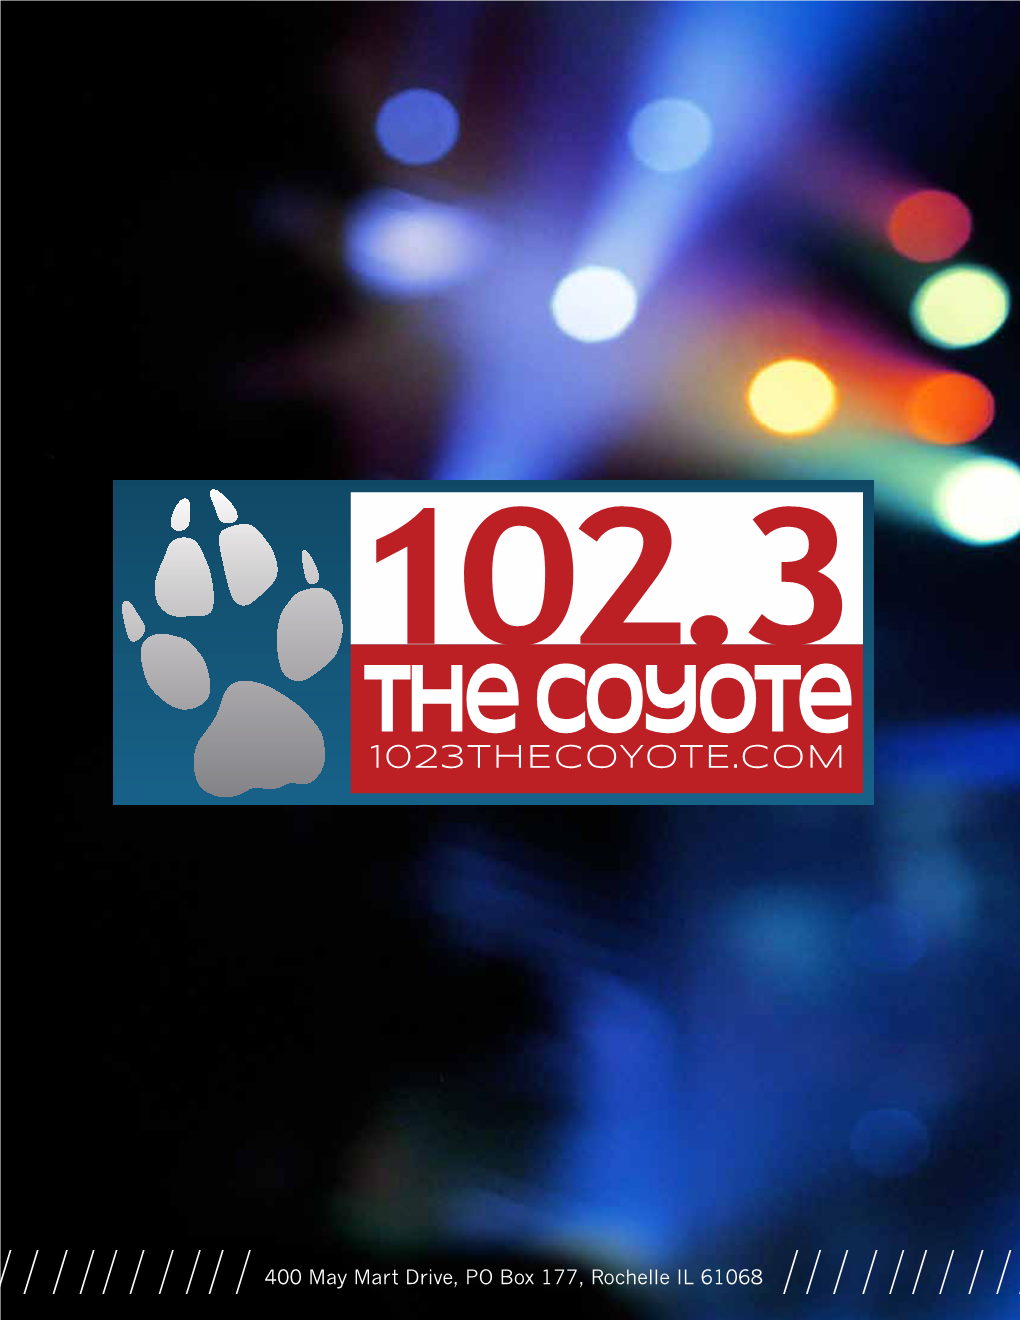 The Coyote 1023THECOYOTE.COM